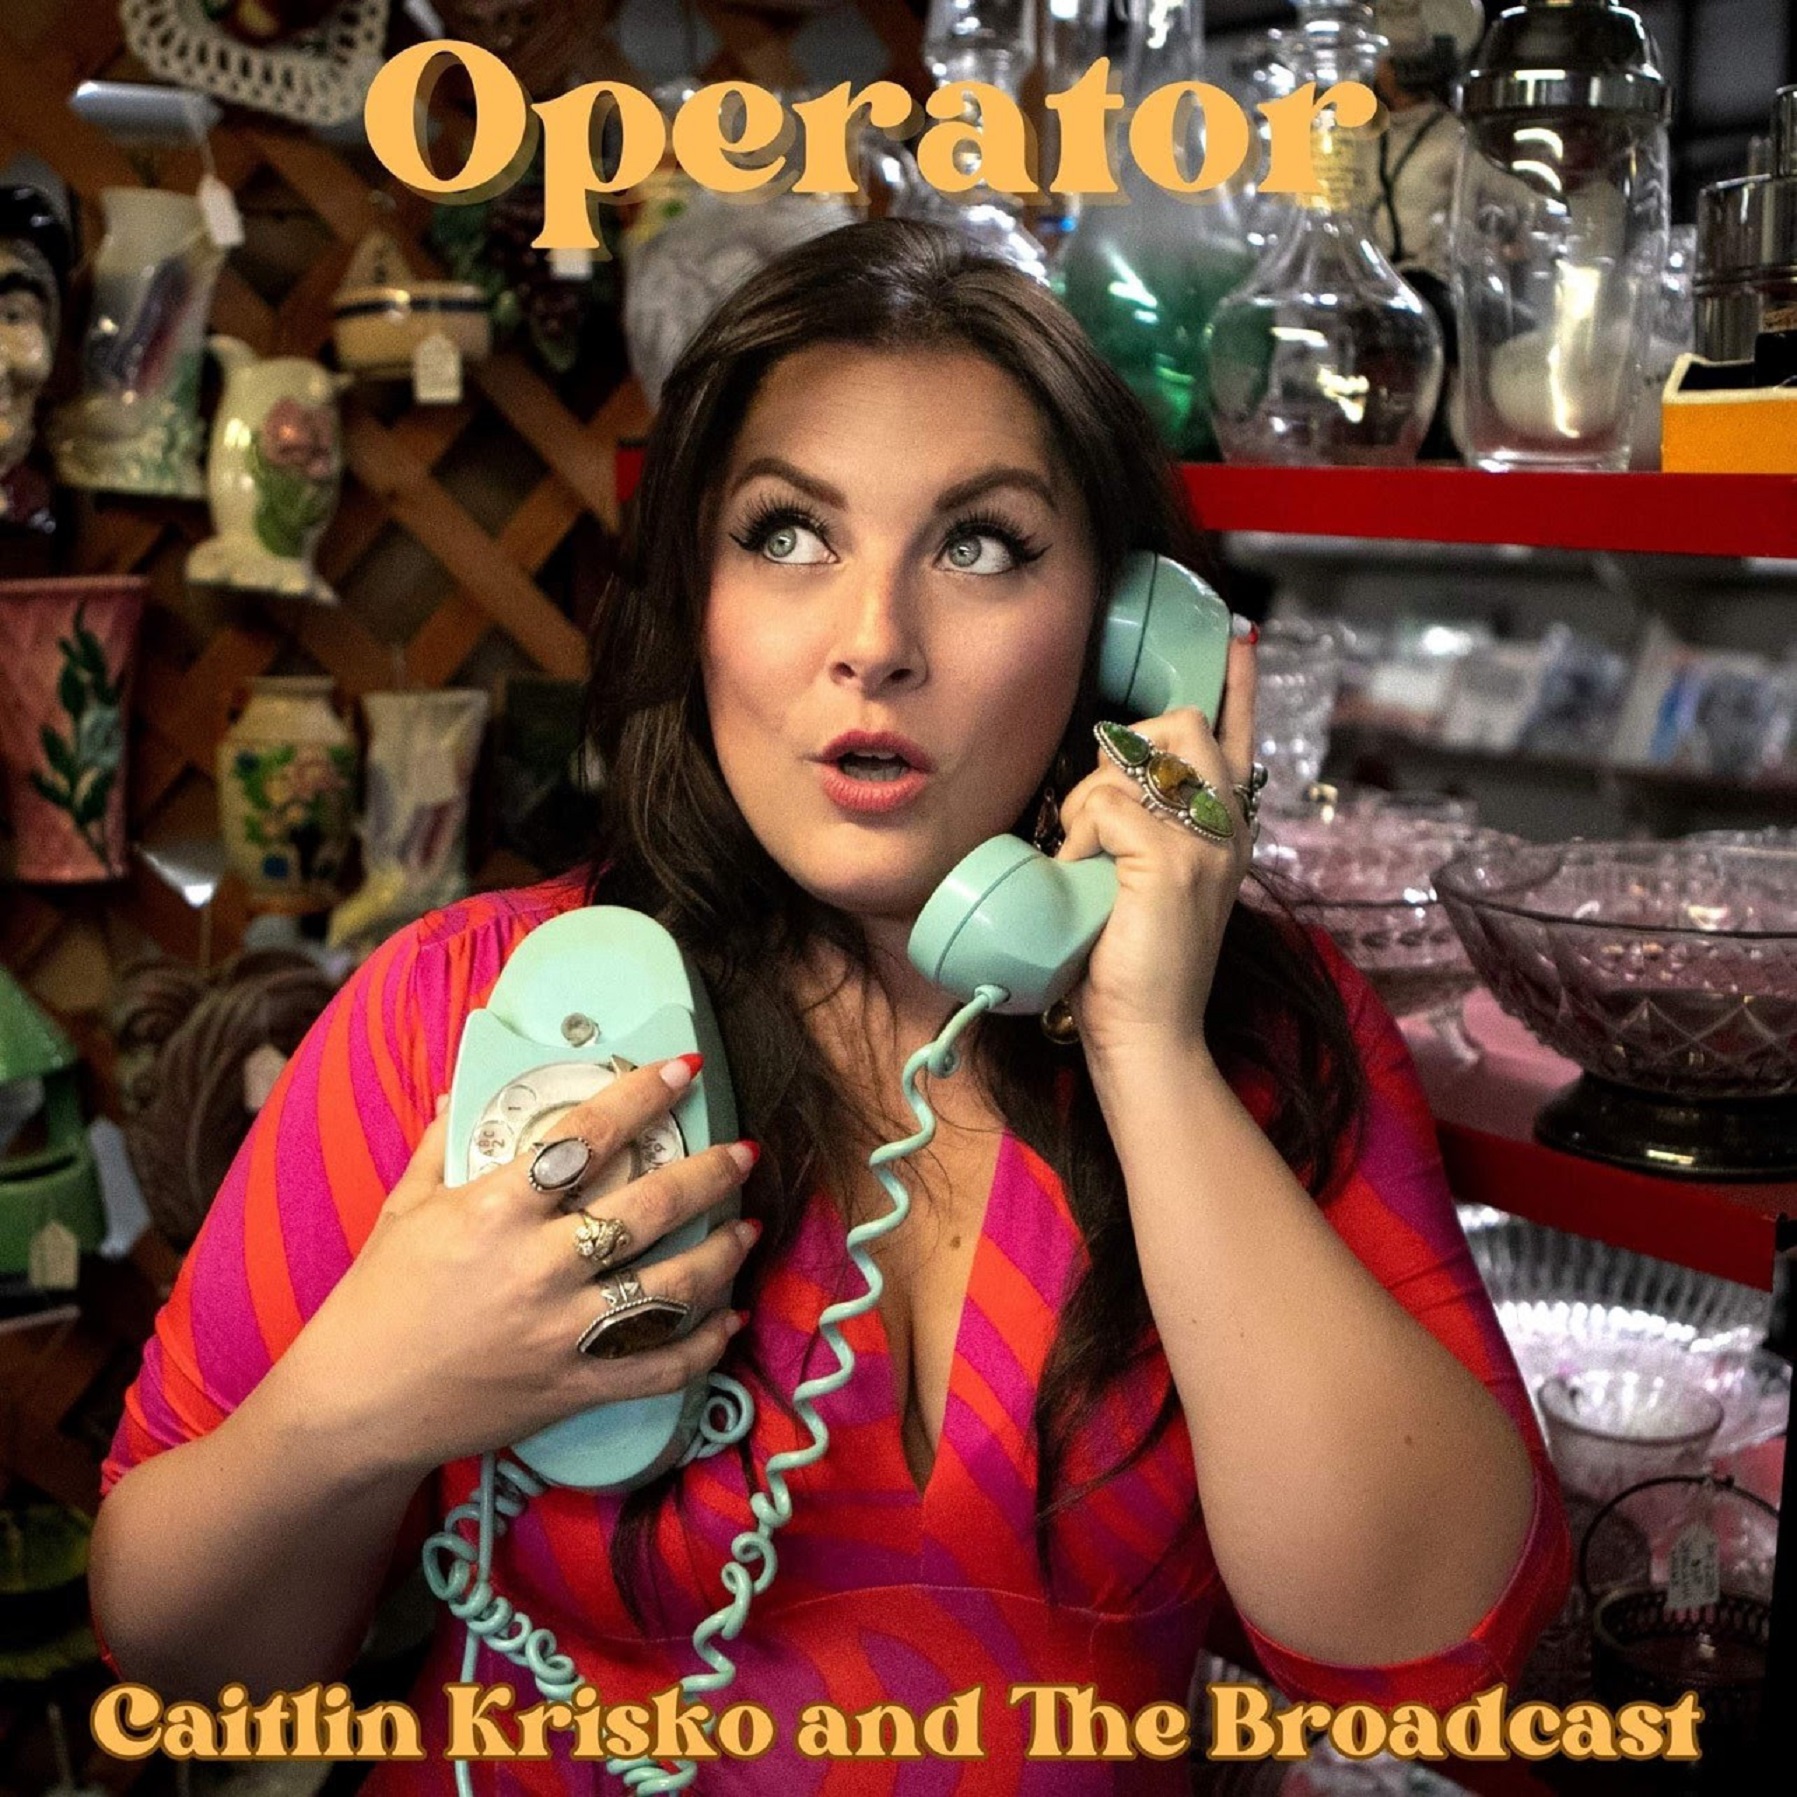 ROOTS ROCKERS CAITLIN KRISKO AND THE BROADCAST RELEASE "OPERATOR"